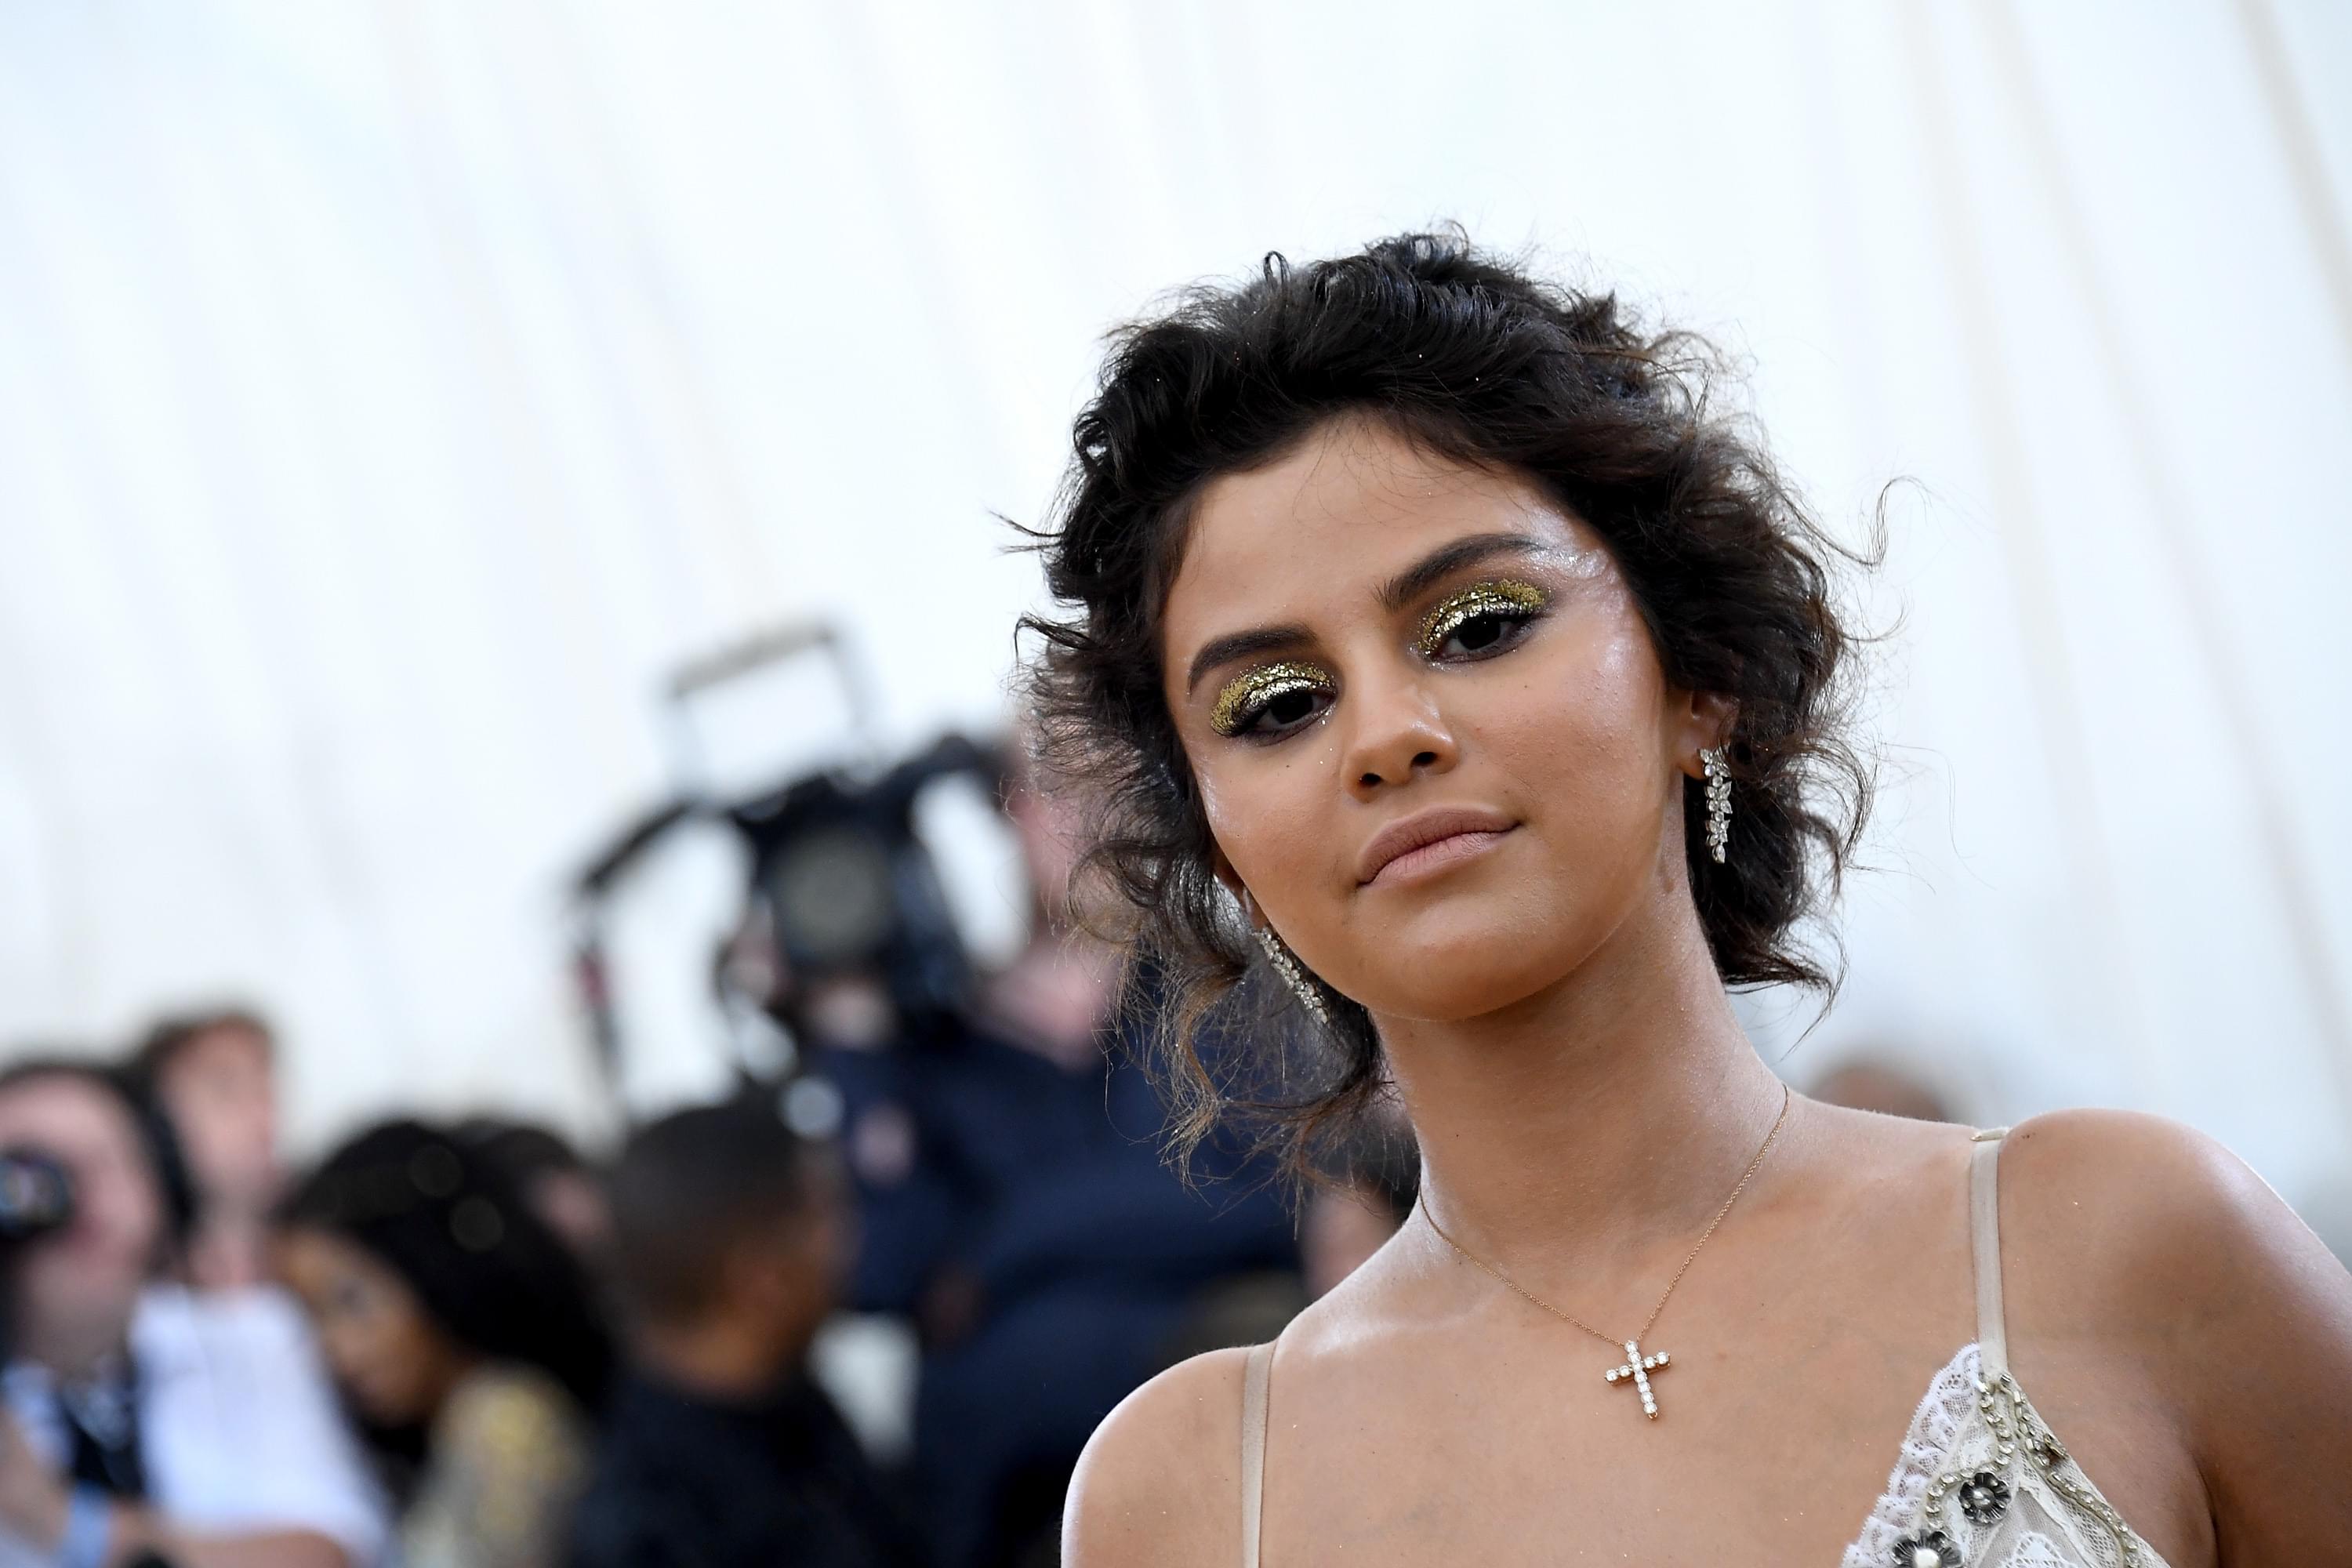 Selena Gomez Releases New Album And Music Video [WATCH]